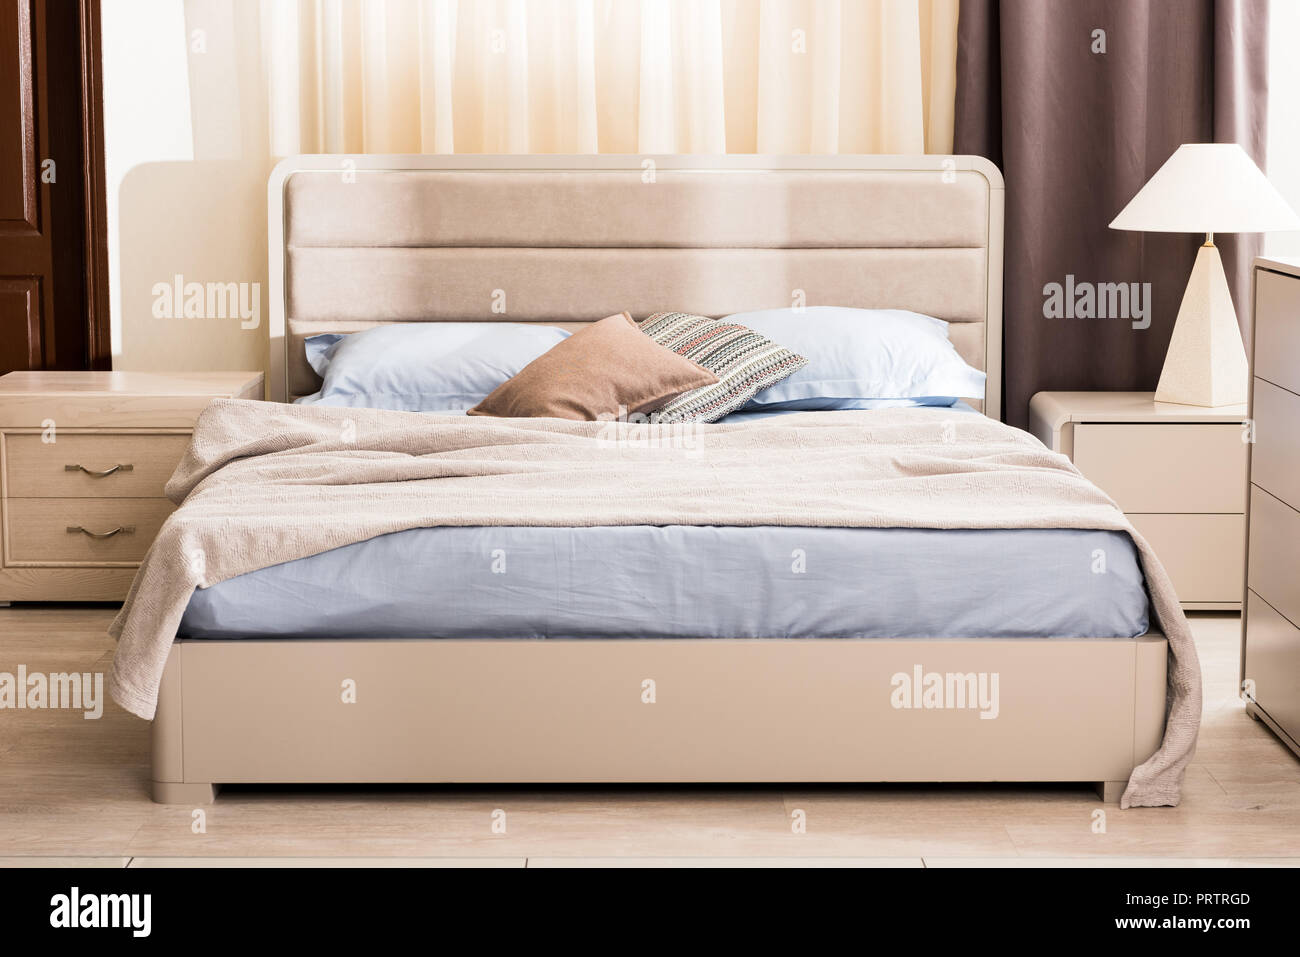 interior of modern bedroom with soft bed and pillows Stock Photo